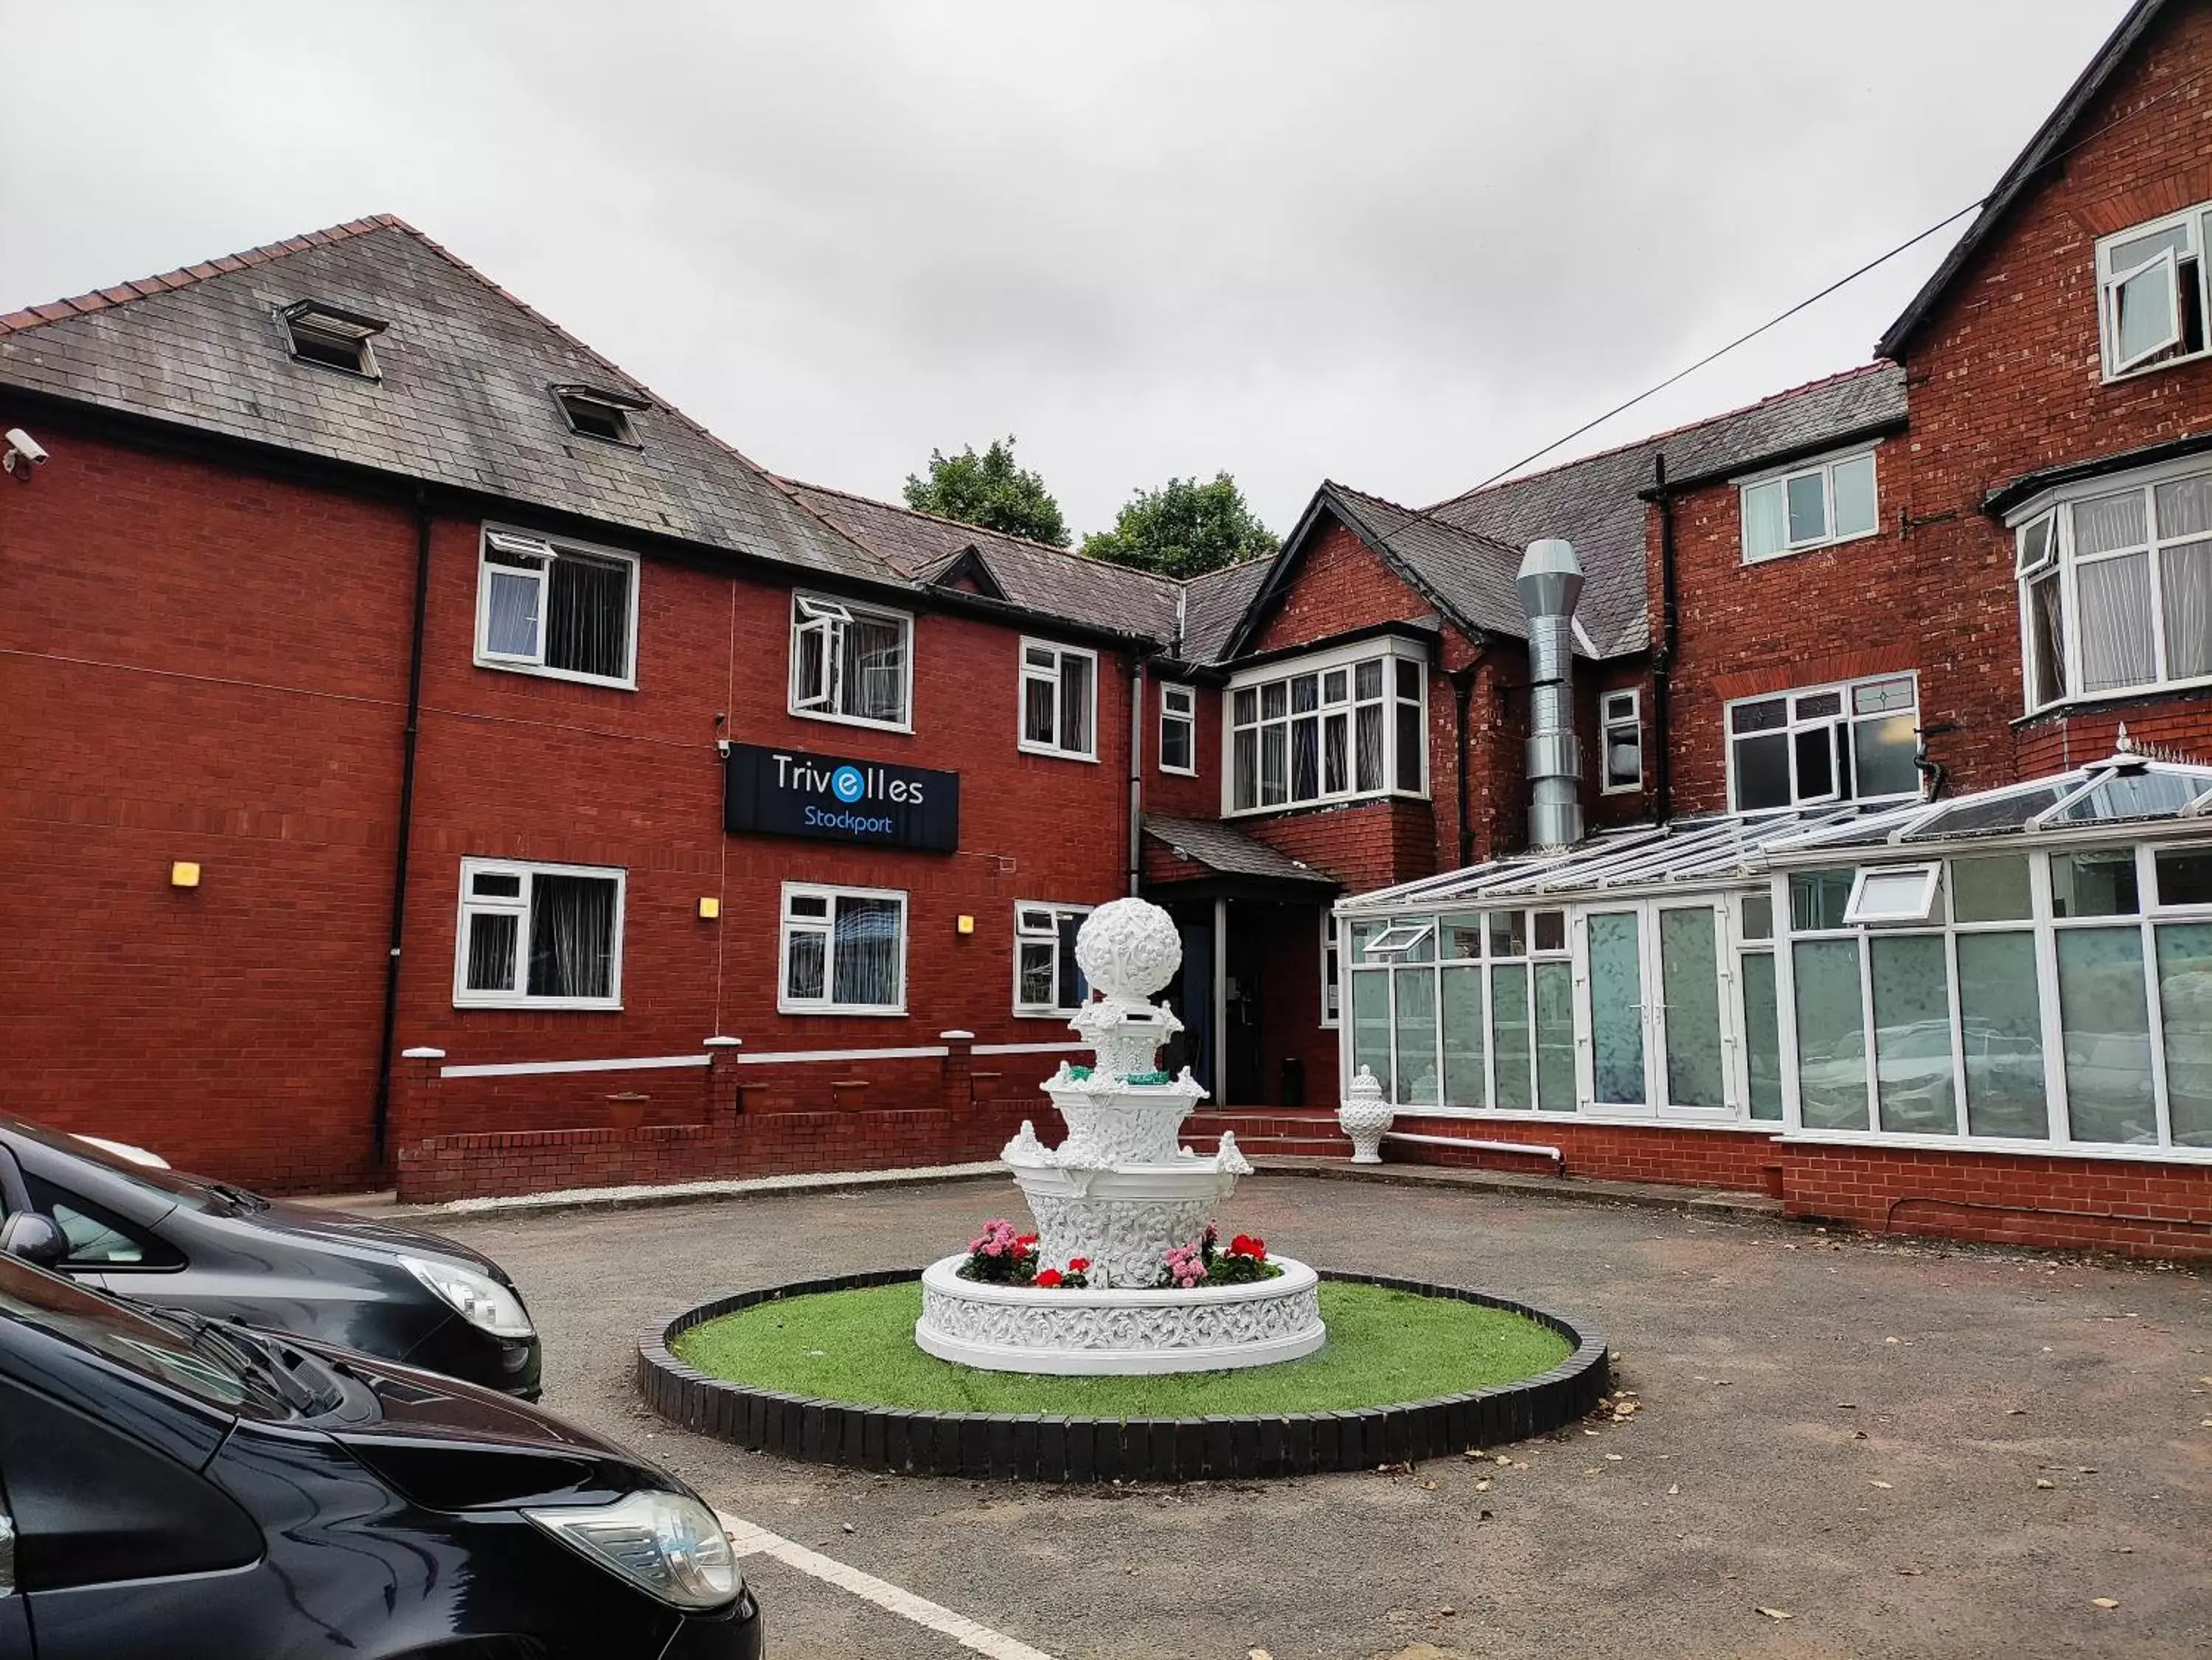 Property Building in Trivelles Mayfair,stockport